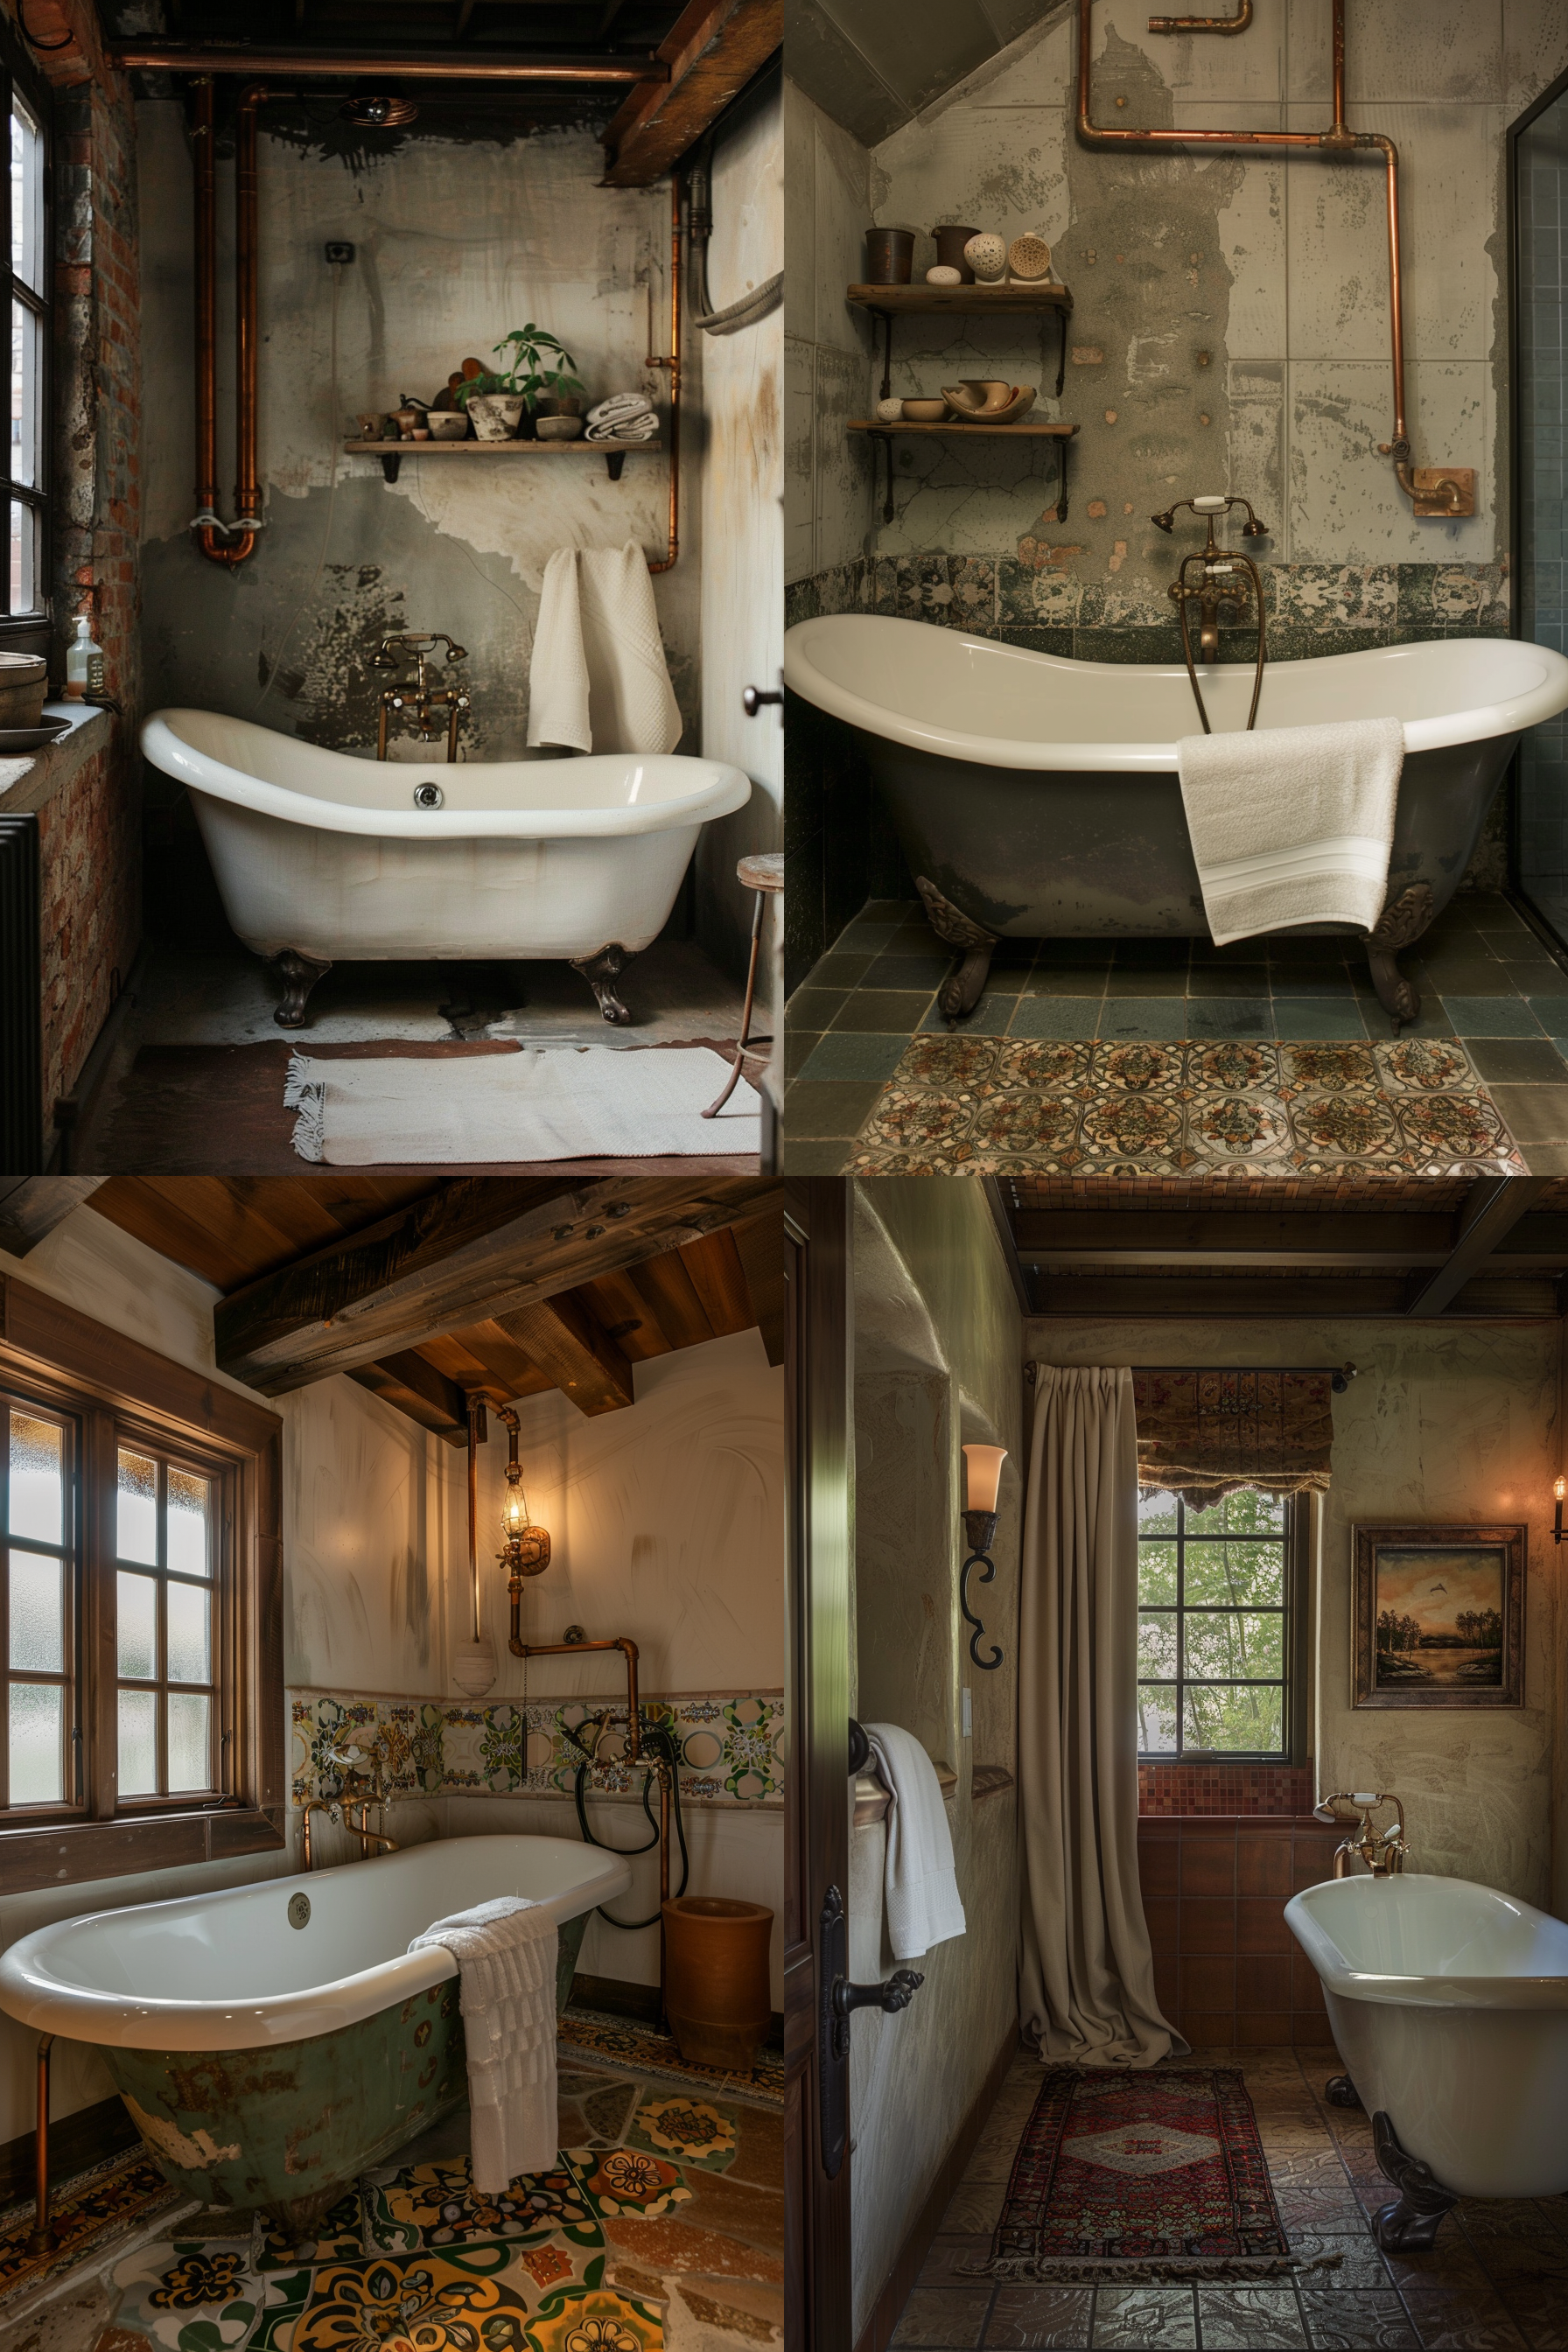 The image is a collage of four different vintage-style bathrooms. Each bathroom has a distinctive clawfoot tub as the centerpiece. The top-left picture shows a white tub with exposed brick and plaster walls, contrasting with sleek copper pipes and a small shelf with plants and toiletries. The top-right image presents another white tub with a towel draped over it, set against green tiled flooring and a rustic backdrop with a wooden shelf holding various items. In the bottom-left photo, a white bath sits against a wall with traditional patterned tiles and rustic elements, including an exposed beam ceiling. A unique feature in this room is the ornate metal wall-mounted lamp. The bottom-right image depicts a more simplistic setup with a white tub on red and patterned tiles, a curtain-draped window, and minimal accessories. ALT text: Collage of four old-fashioned bathrooms with white clawfoot tubs and rustic decor.